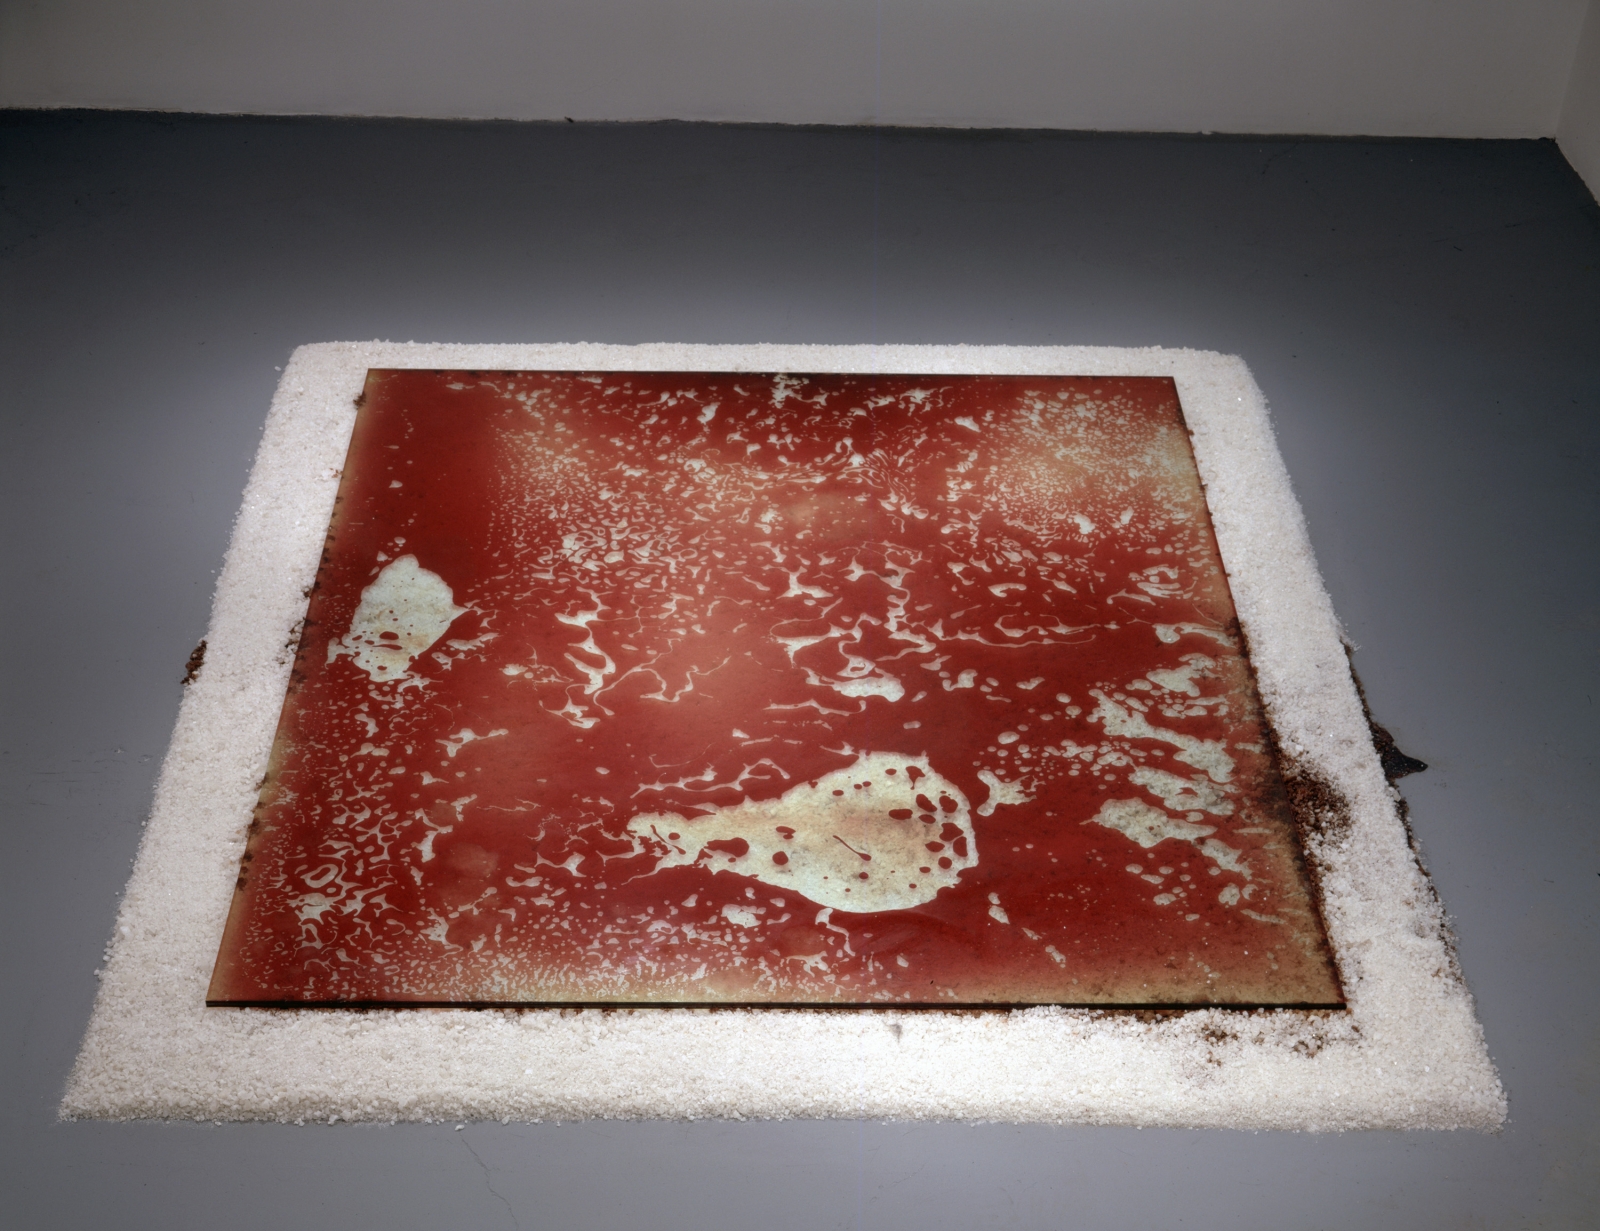 Red on White, 1993, 1/2 gallon of blood, glass, rock salt